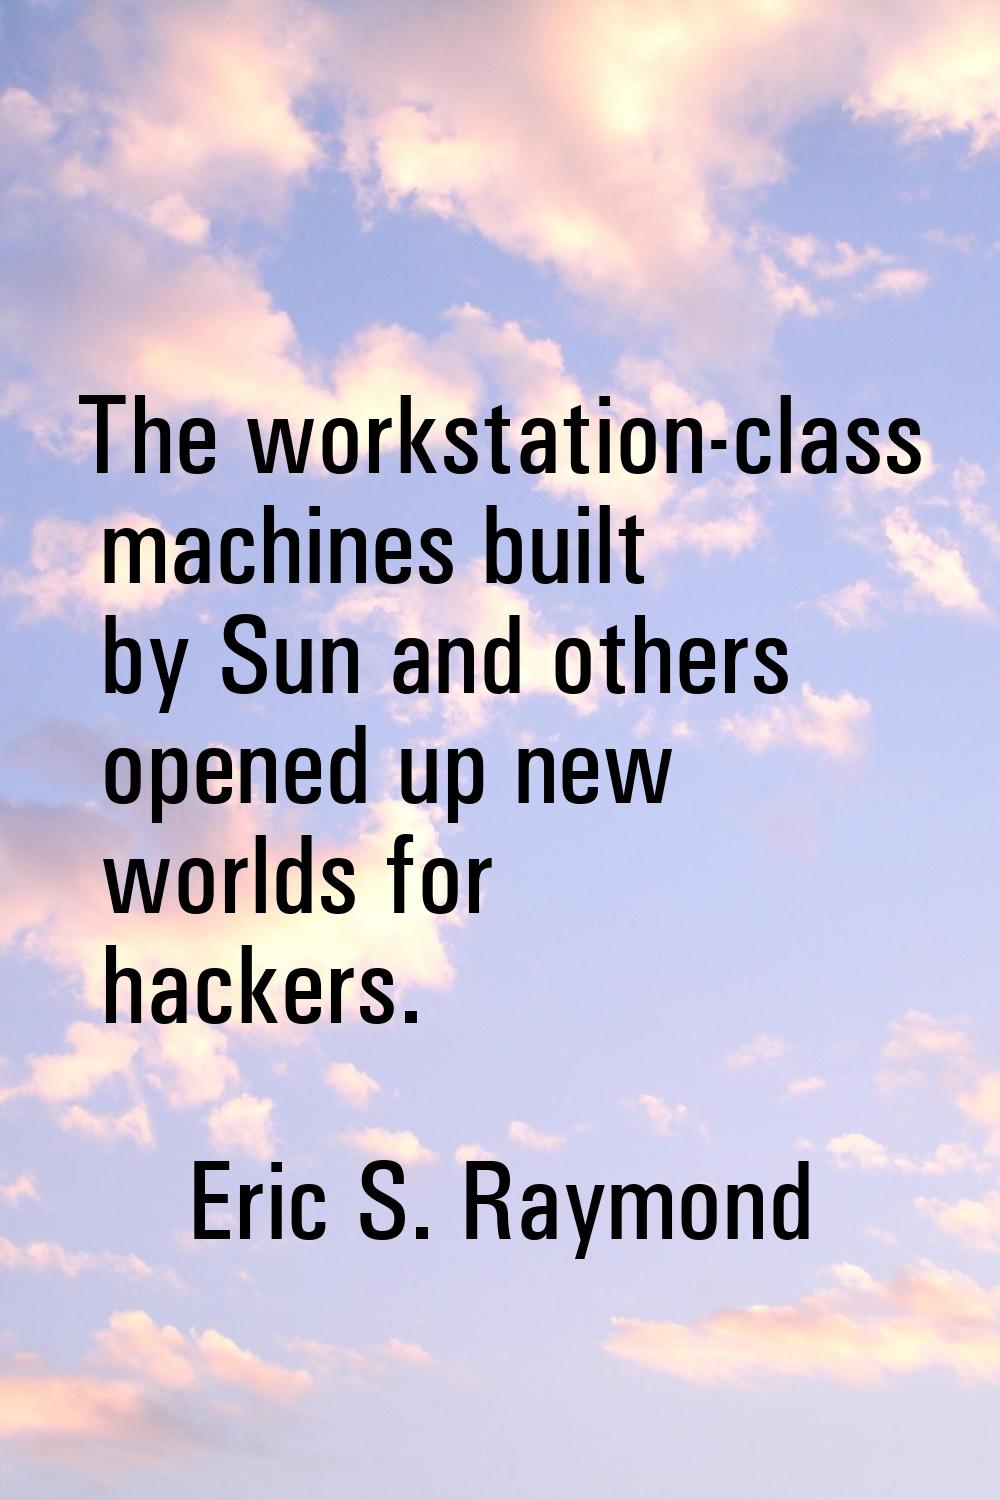 The workstation-class machines built by Sun and others opened up new worlds for hackers.